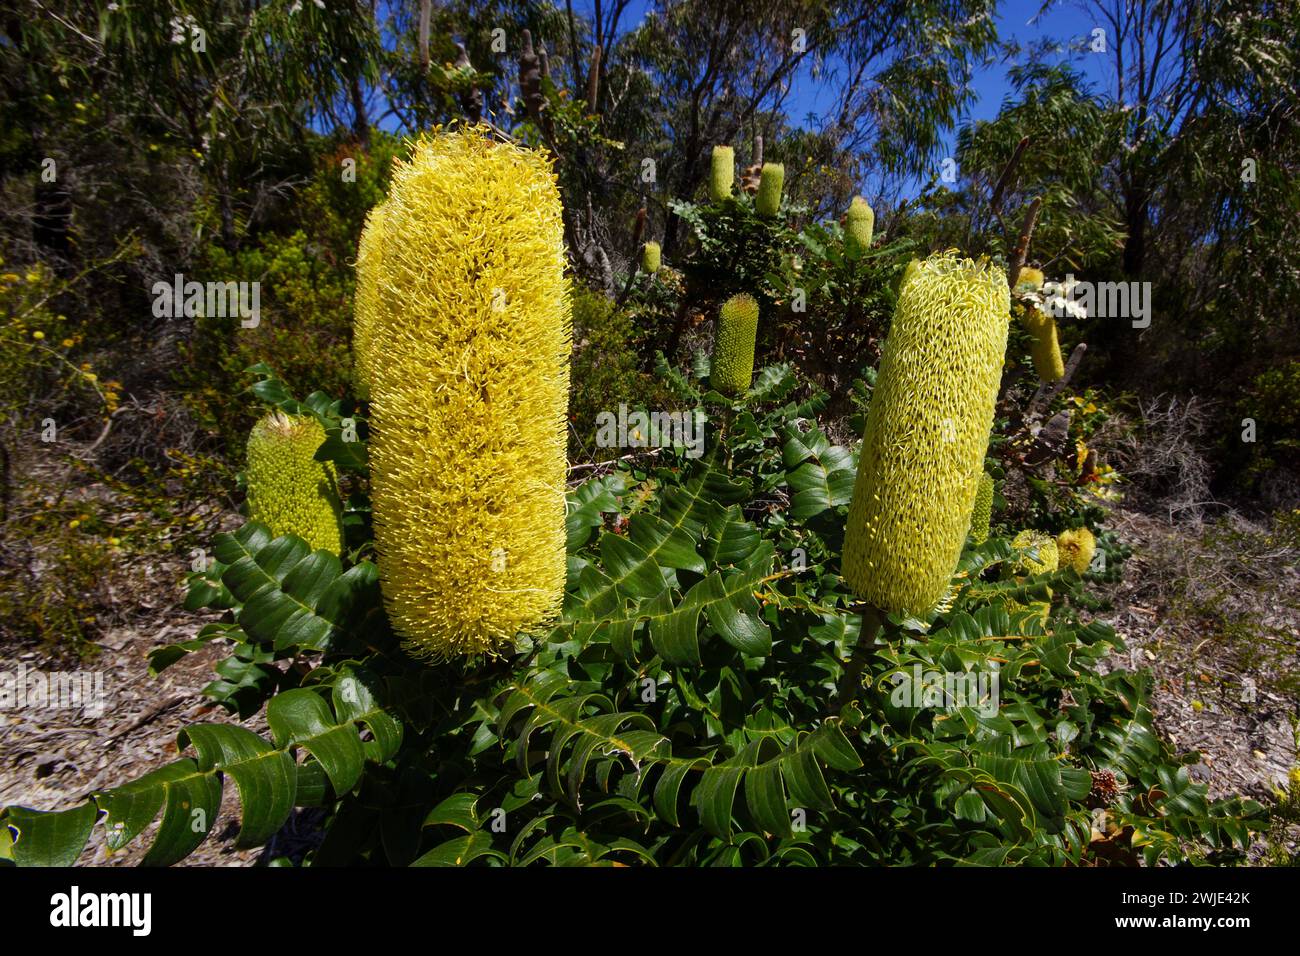 Bull Banksia (Banksia grandis) with yellow flower spikes and saw-toothed leaves, in natural habitat, Western Australia Stock Photo